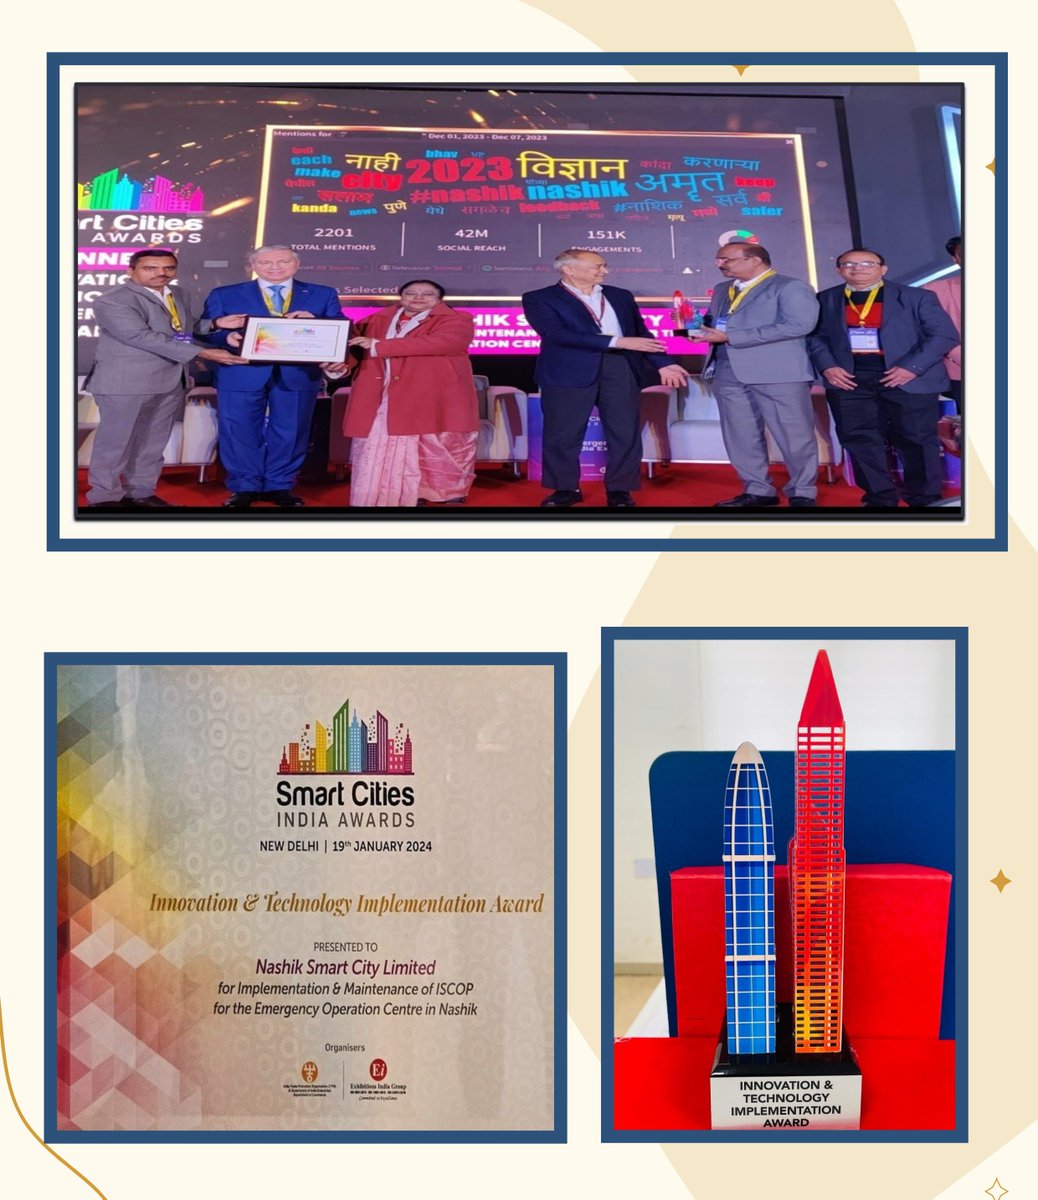 🏆 Exciting News! Nashik Smart City clinches the 'Innovation and Technology Implementation Award for Social Media Analytics' at the Smart Cities India event. 🌐🔍 Cheers to a tech-savvy future! #SmartCityKiSmartKahani #mohuaindia #smartcitymission #SmartCity #Innovation